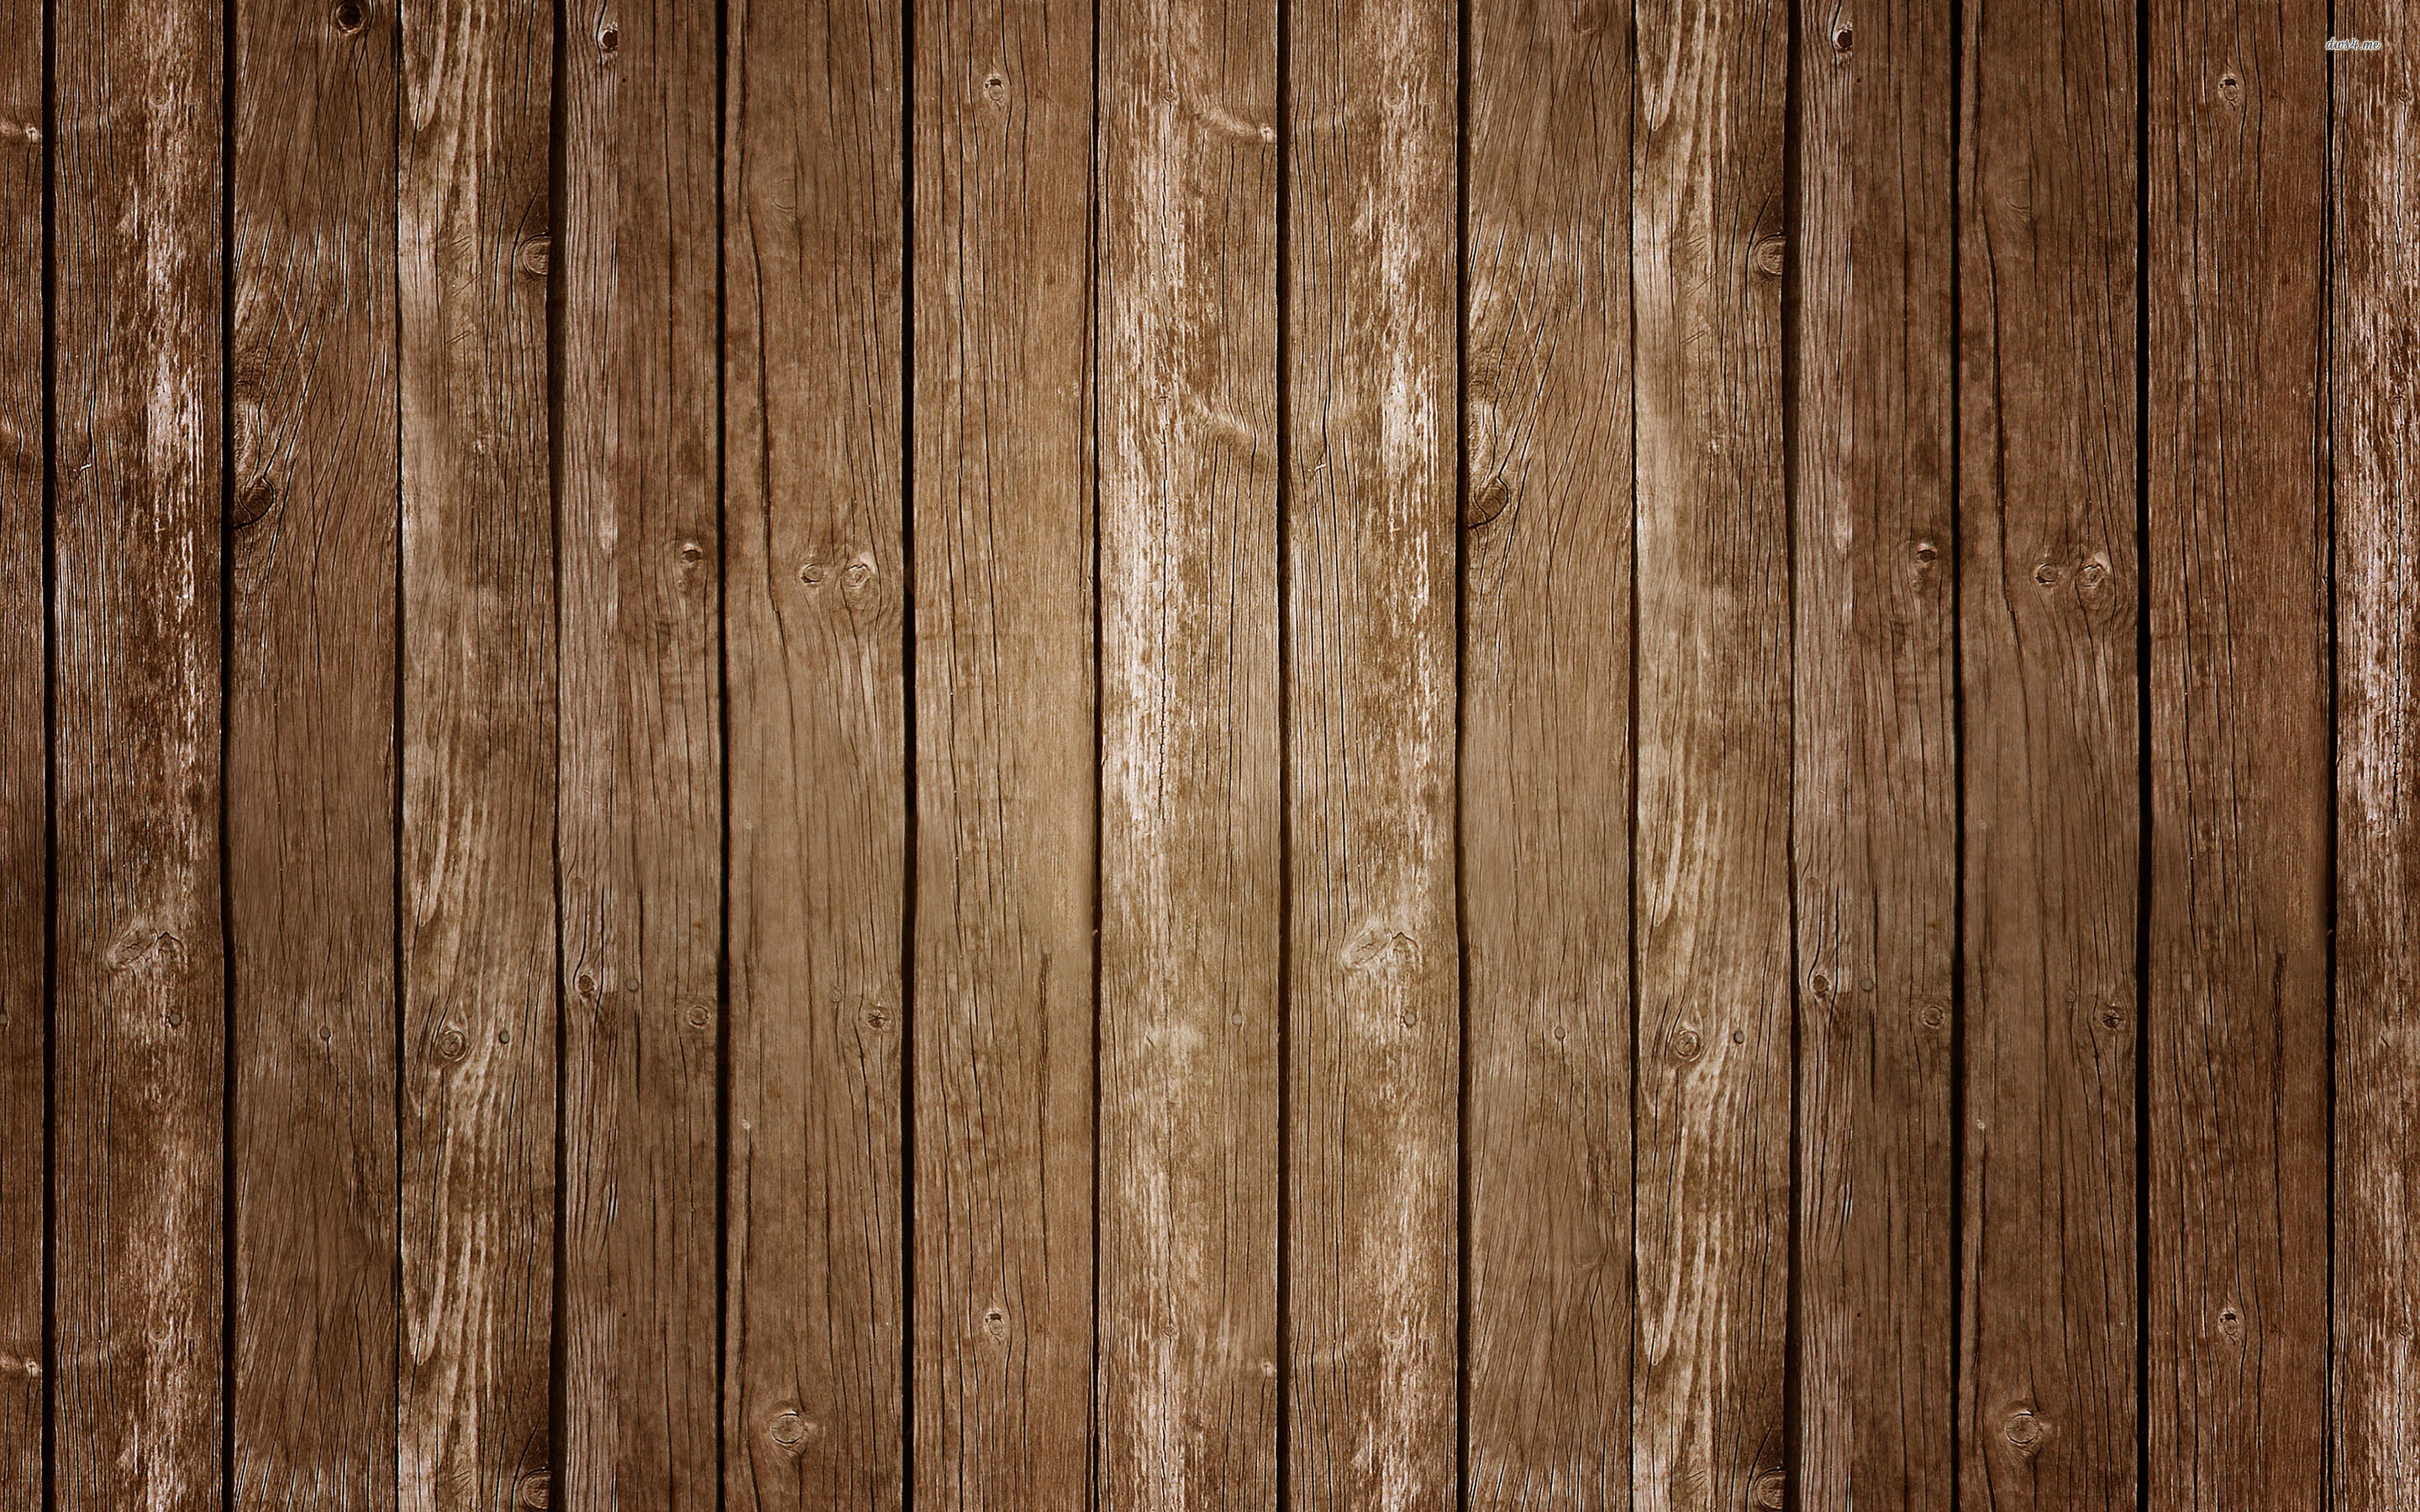 Free photo: Vintage Wood Texture, Old, Surface